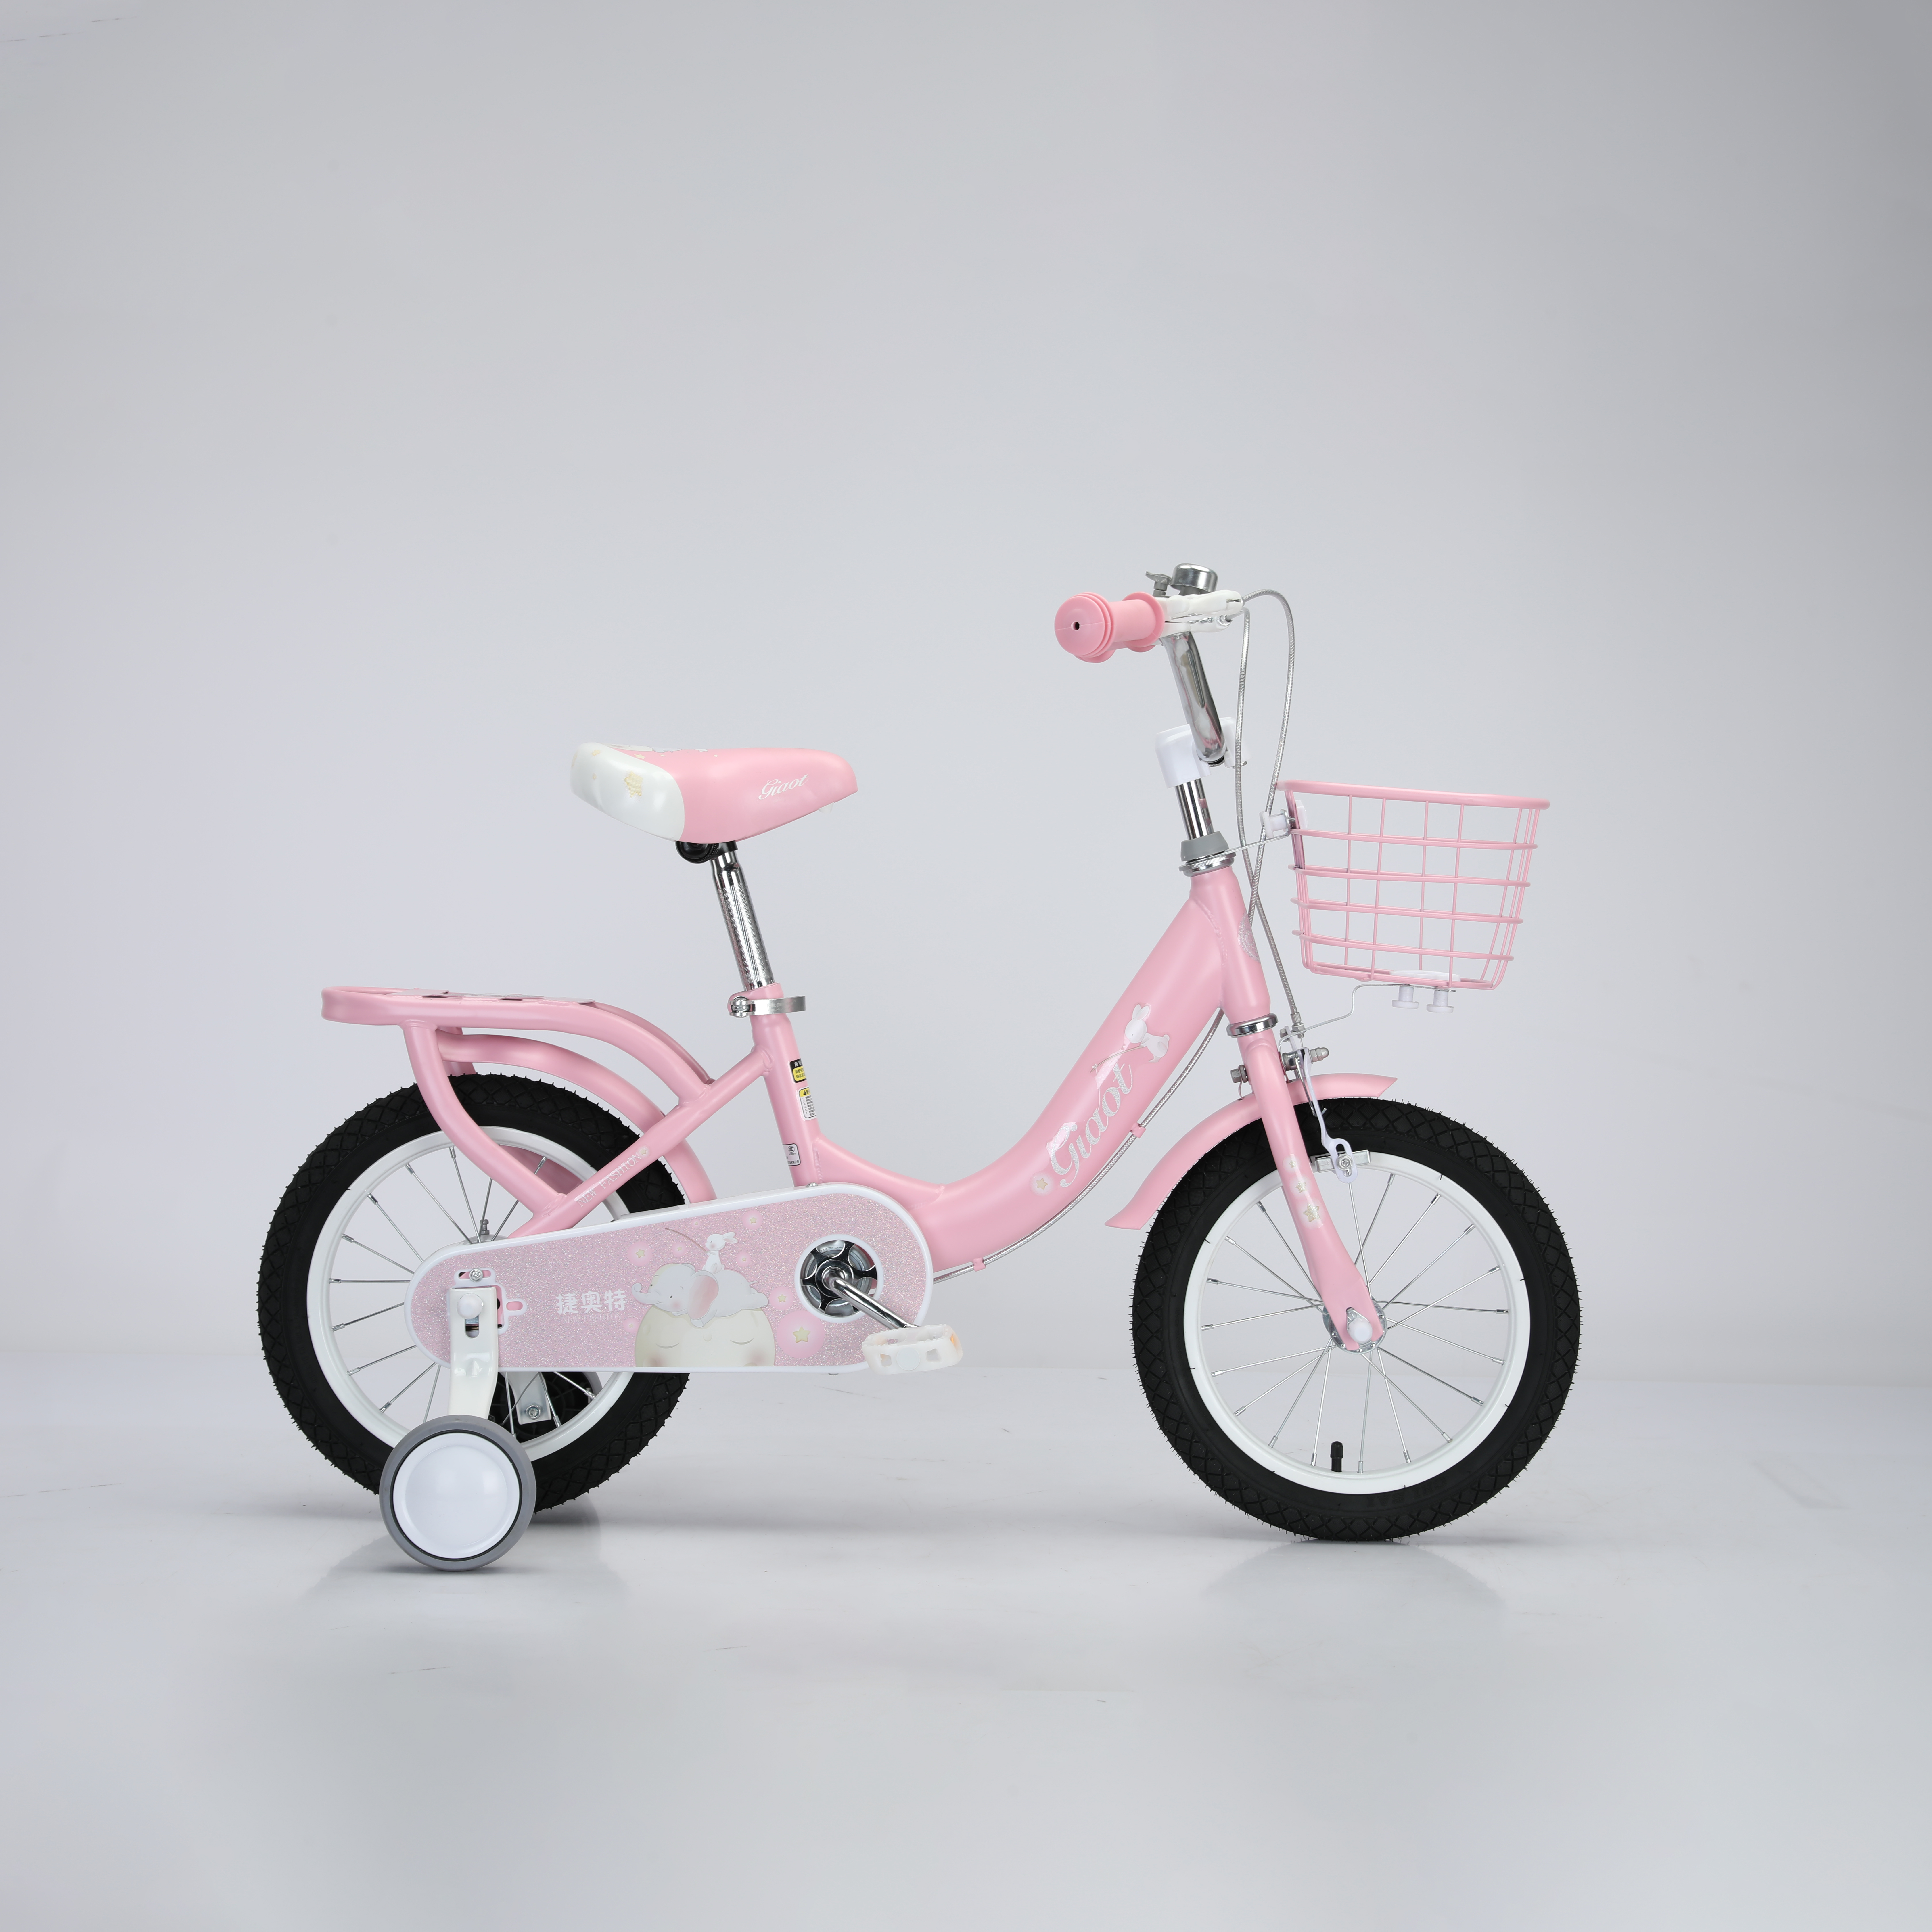 Introducing the Premium Kids Bike from Hebei Giaot! Featured Image